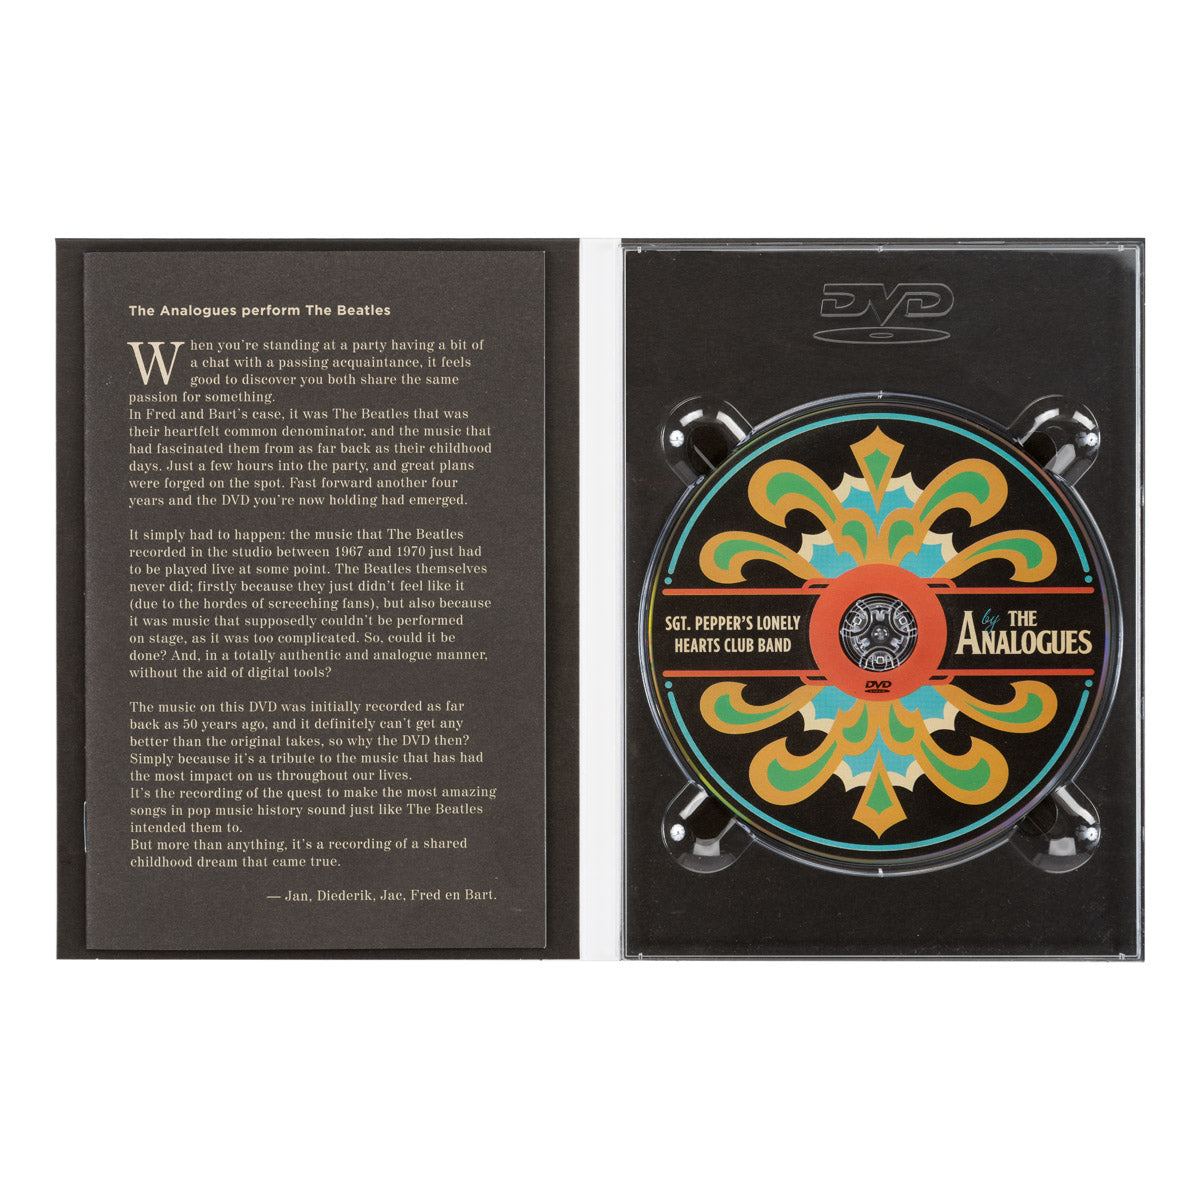 The Analogues | Sgt. Pepper's Lonely Hearts Club Band Live concert DVD | Inside